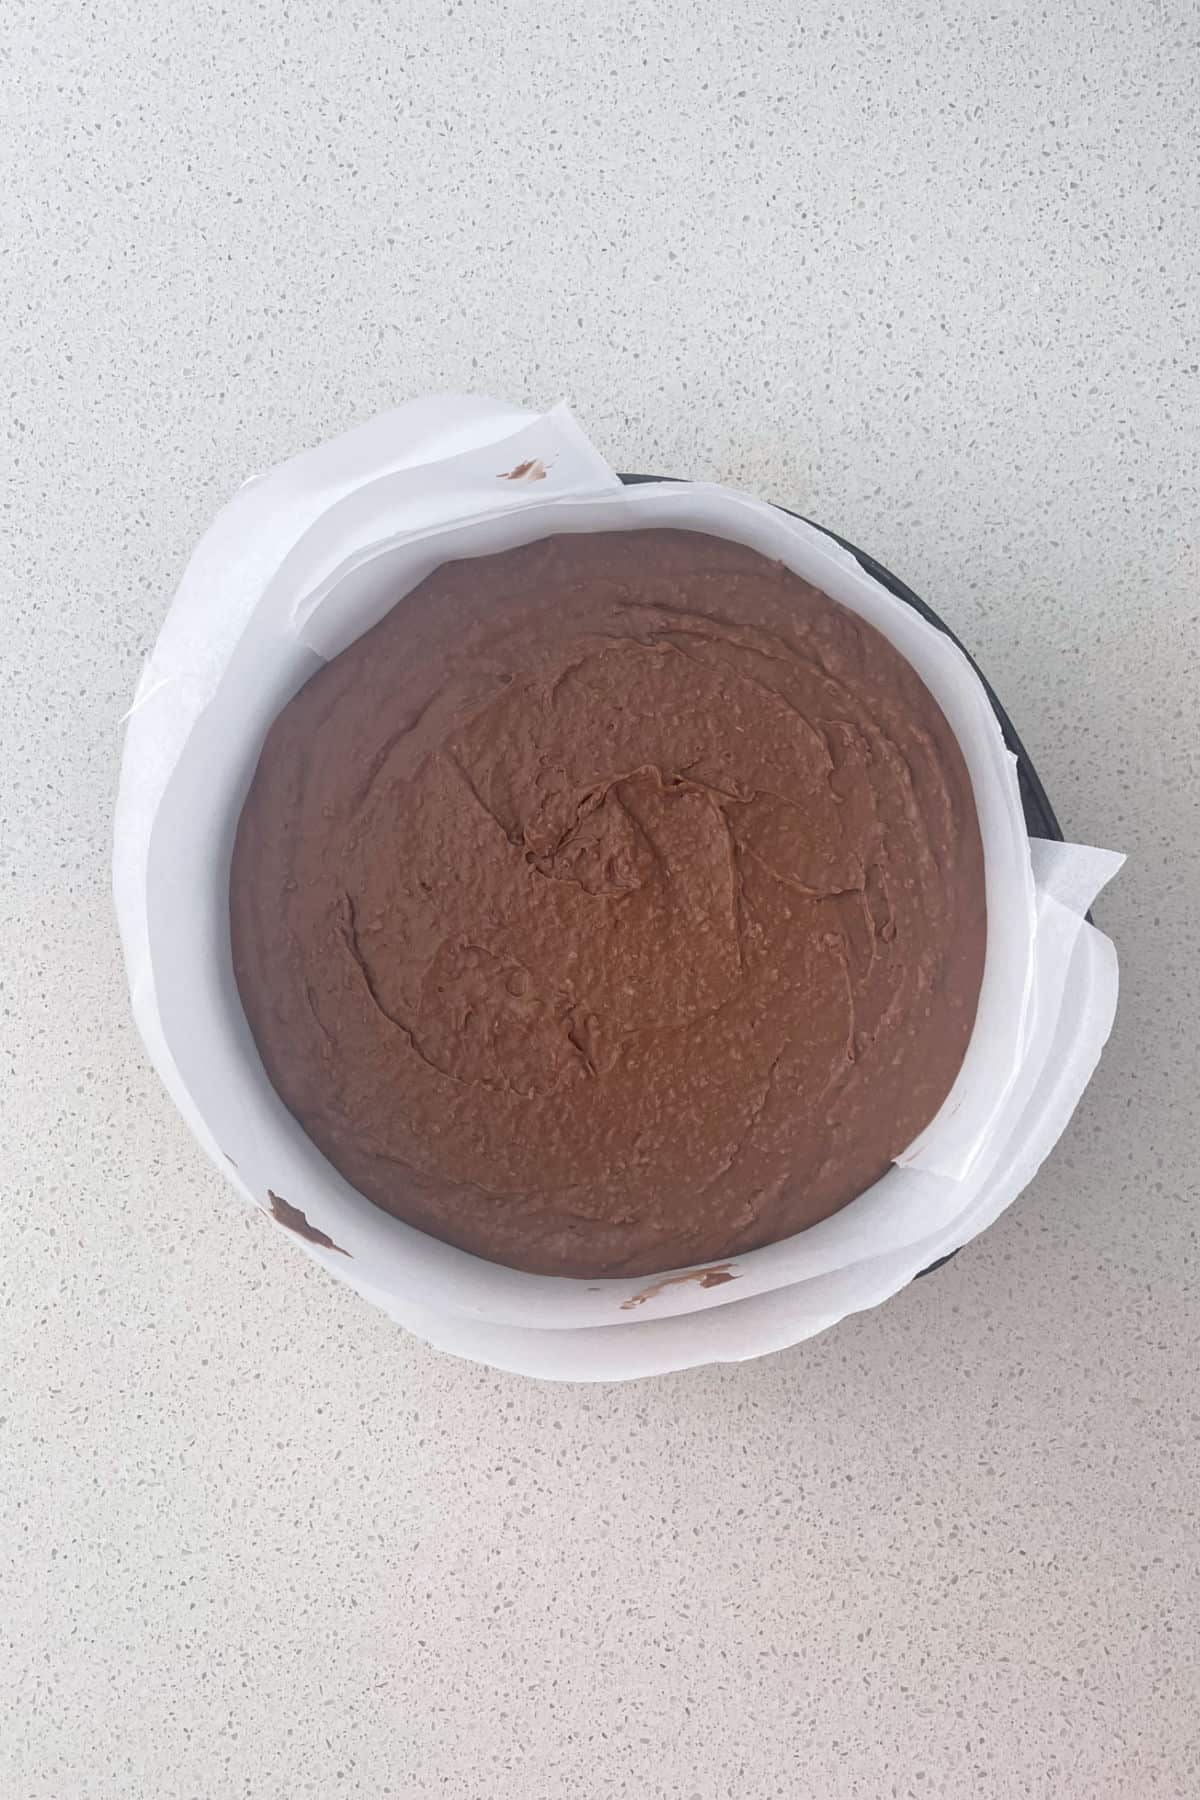 Thermomix chocolate and coconut cake mixture in a cake tin ready for the oven.